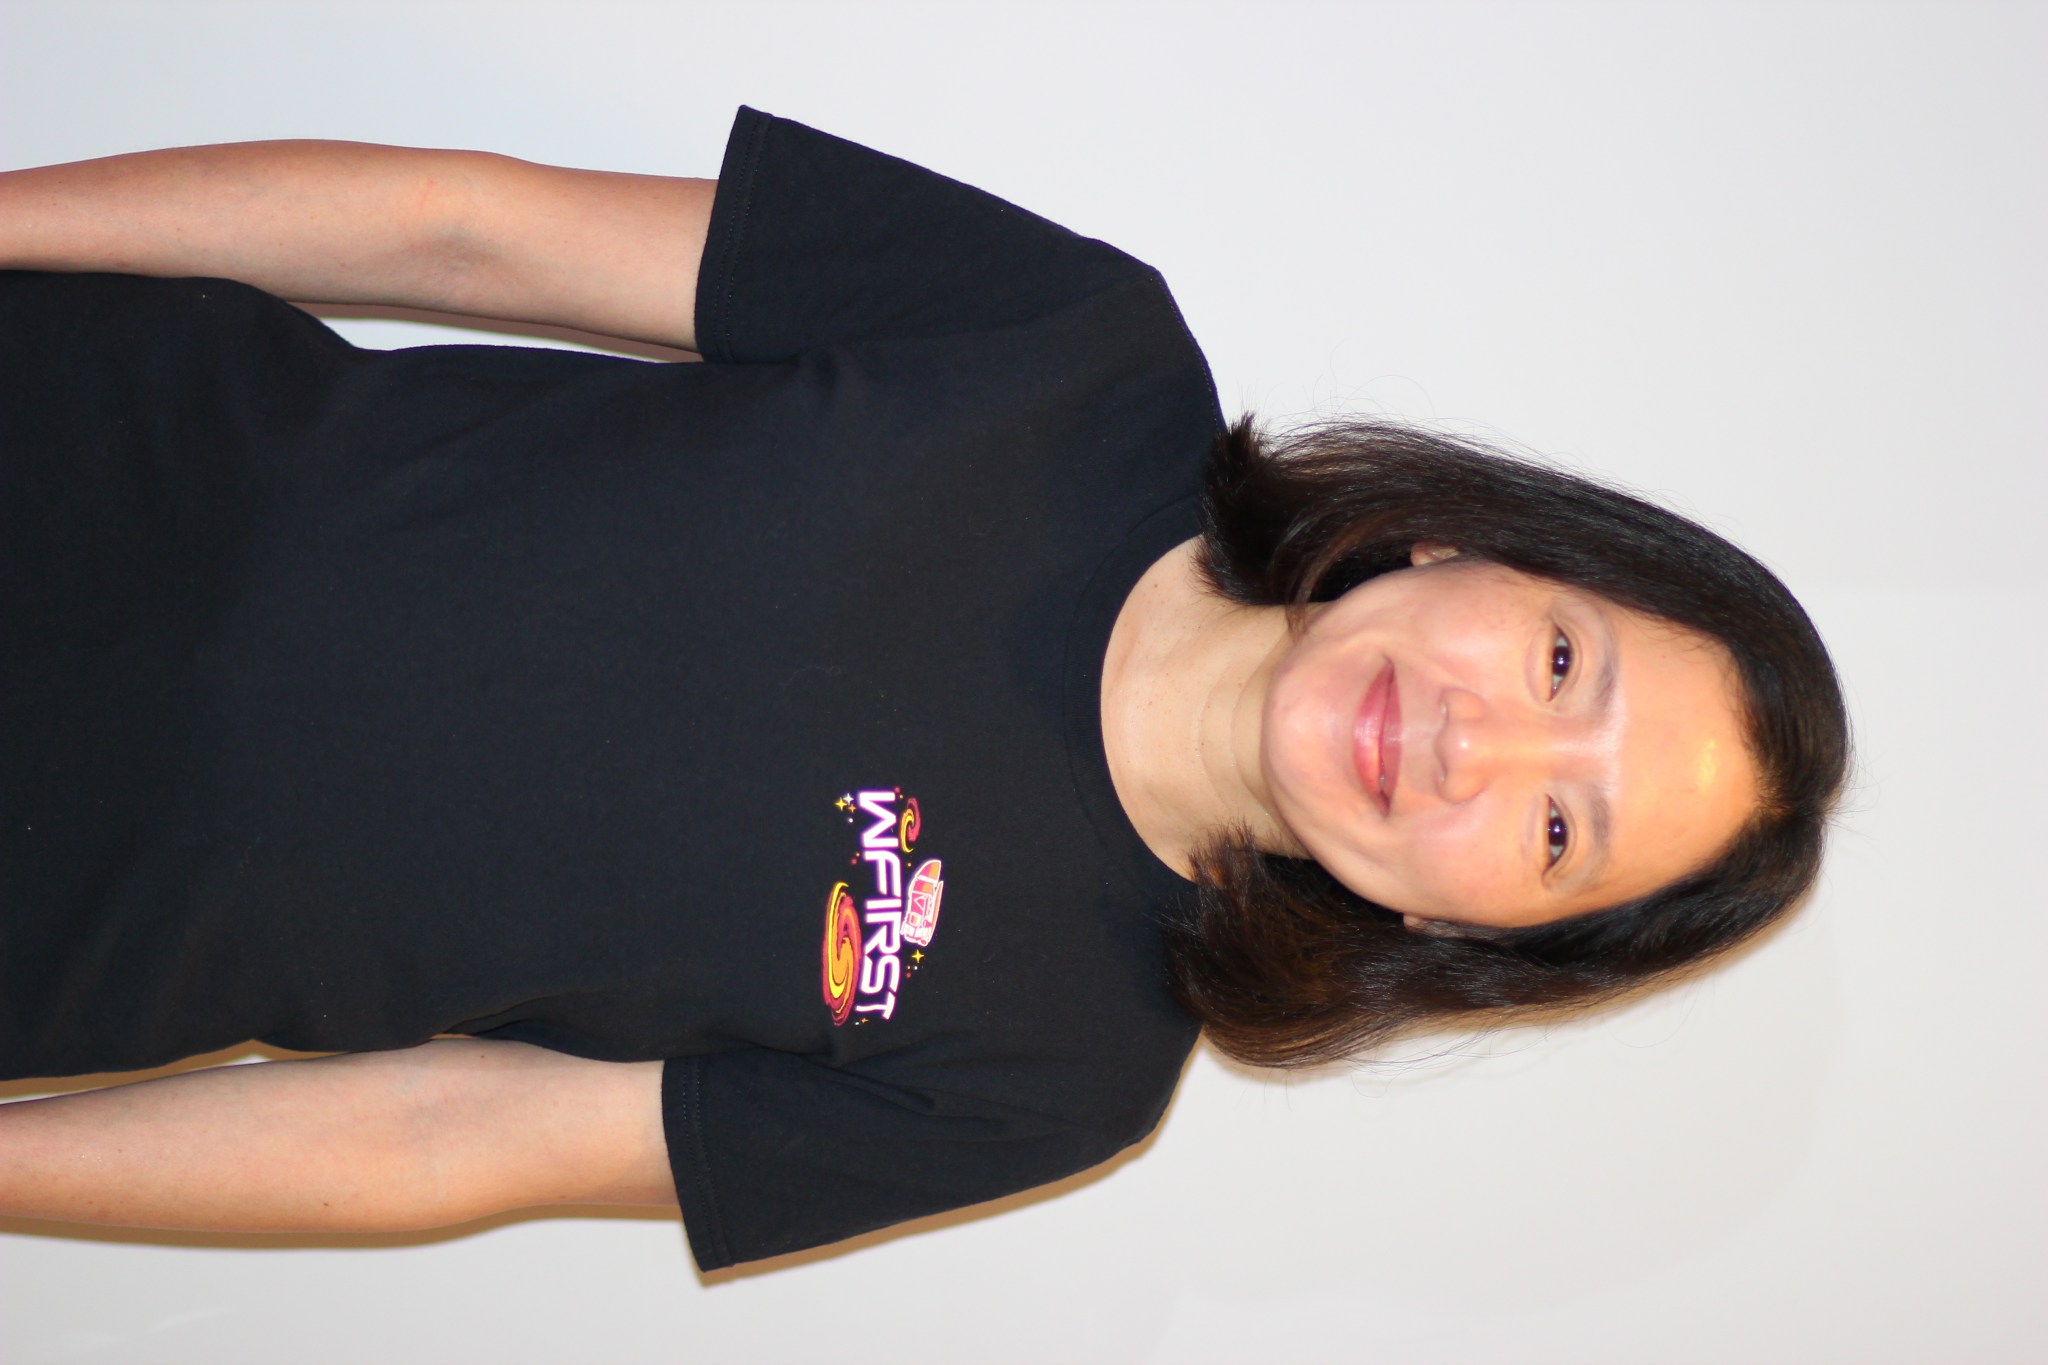 An Asian woman with shoulder-length dark hair stands in front of a white background, smiling. She is wearing a black T-shirt with the WFIRST logo on the left chest.